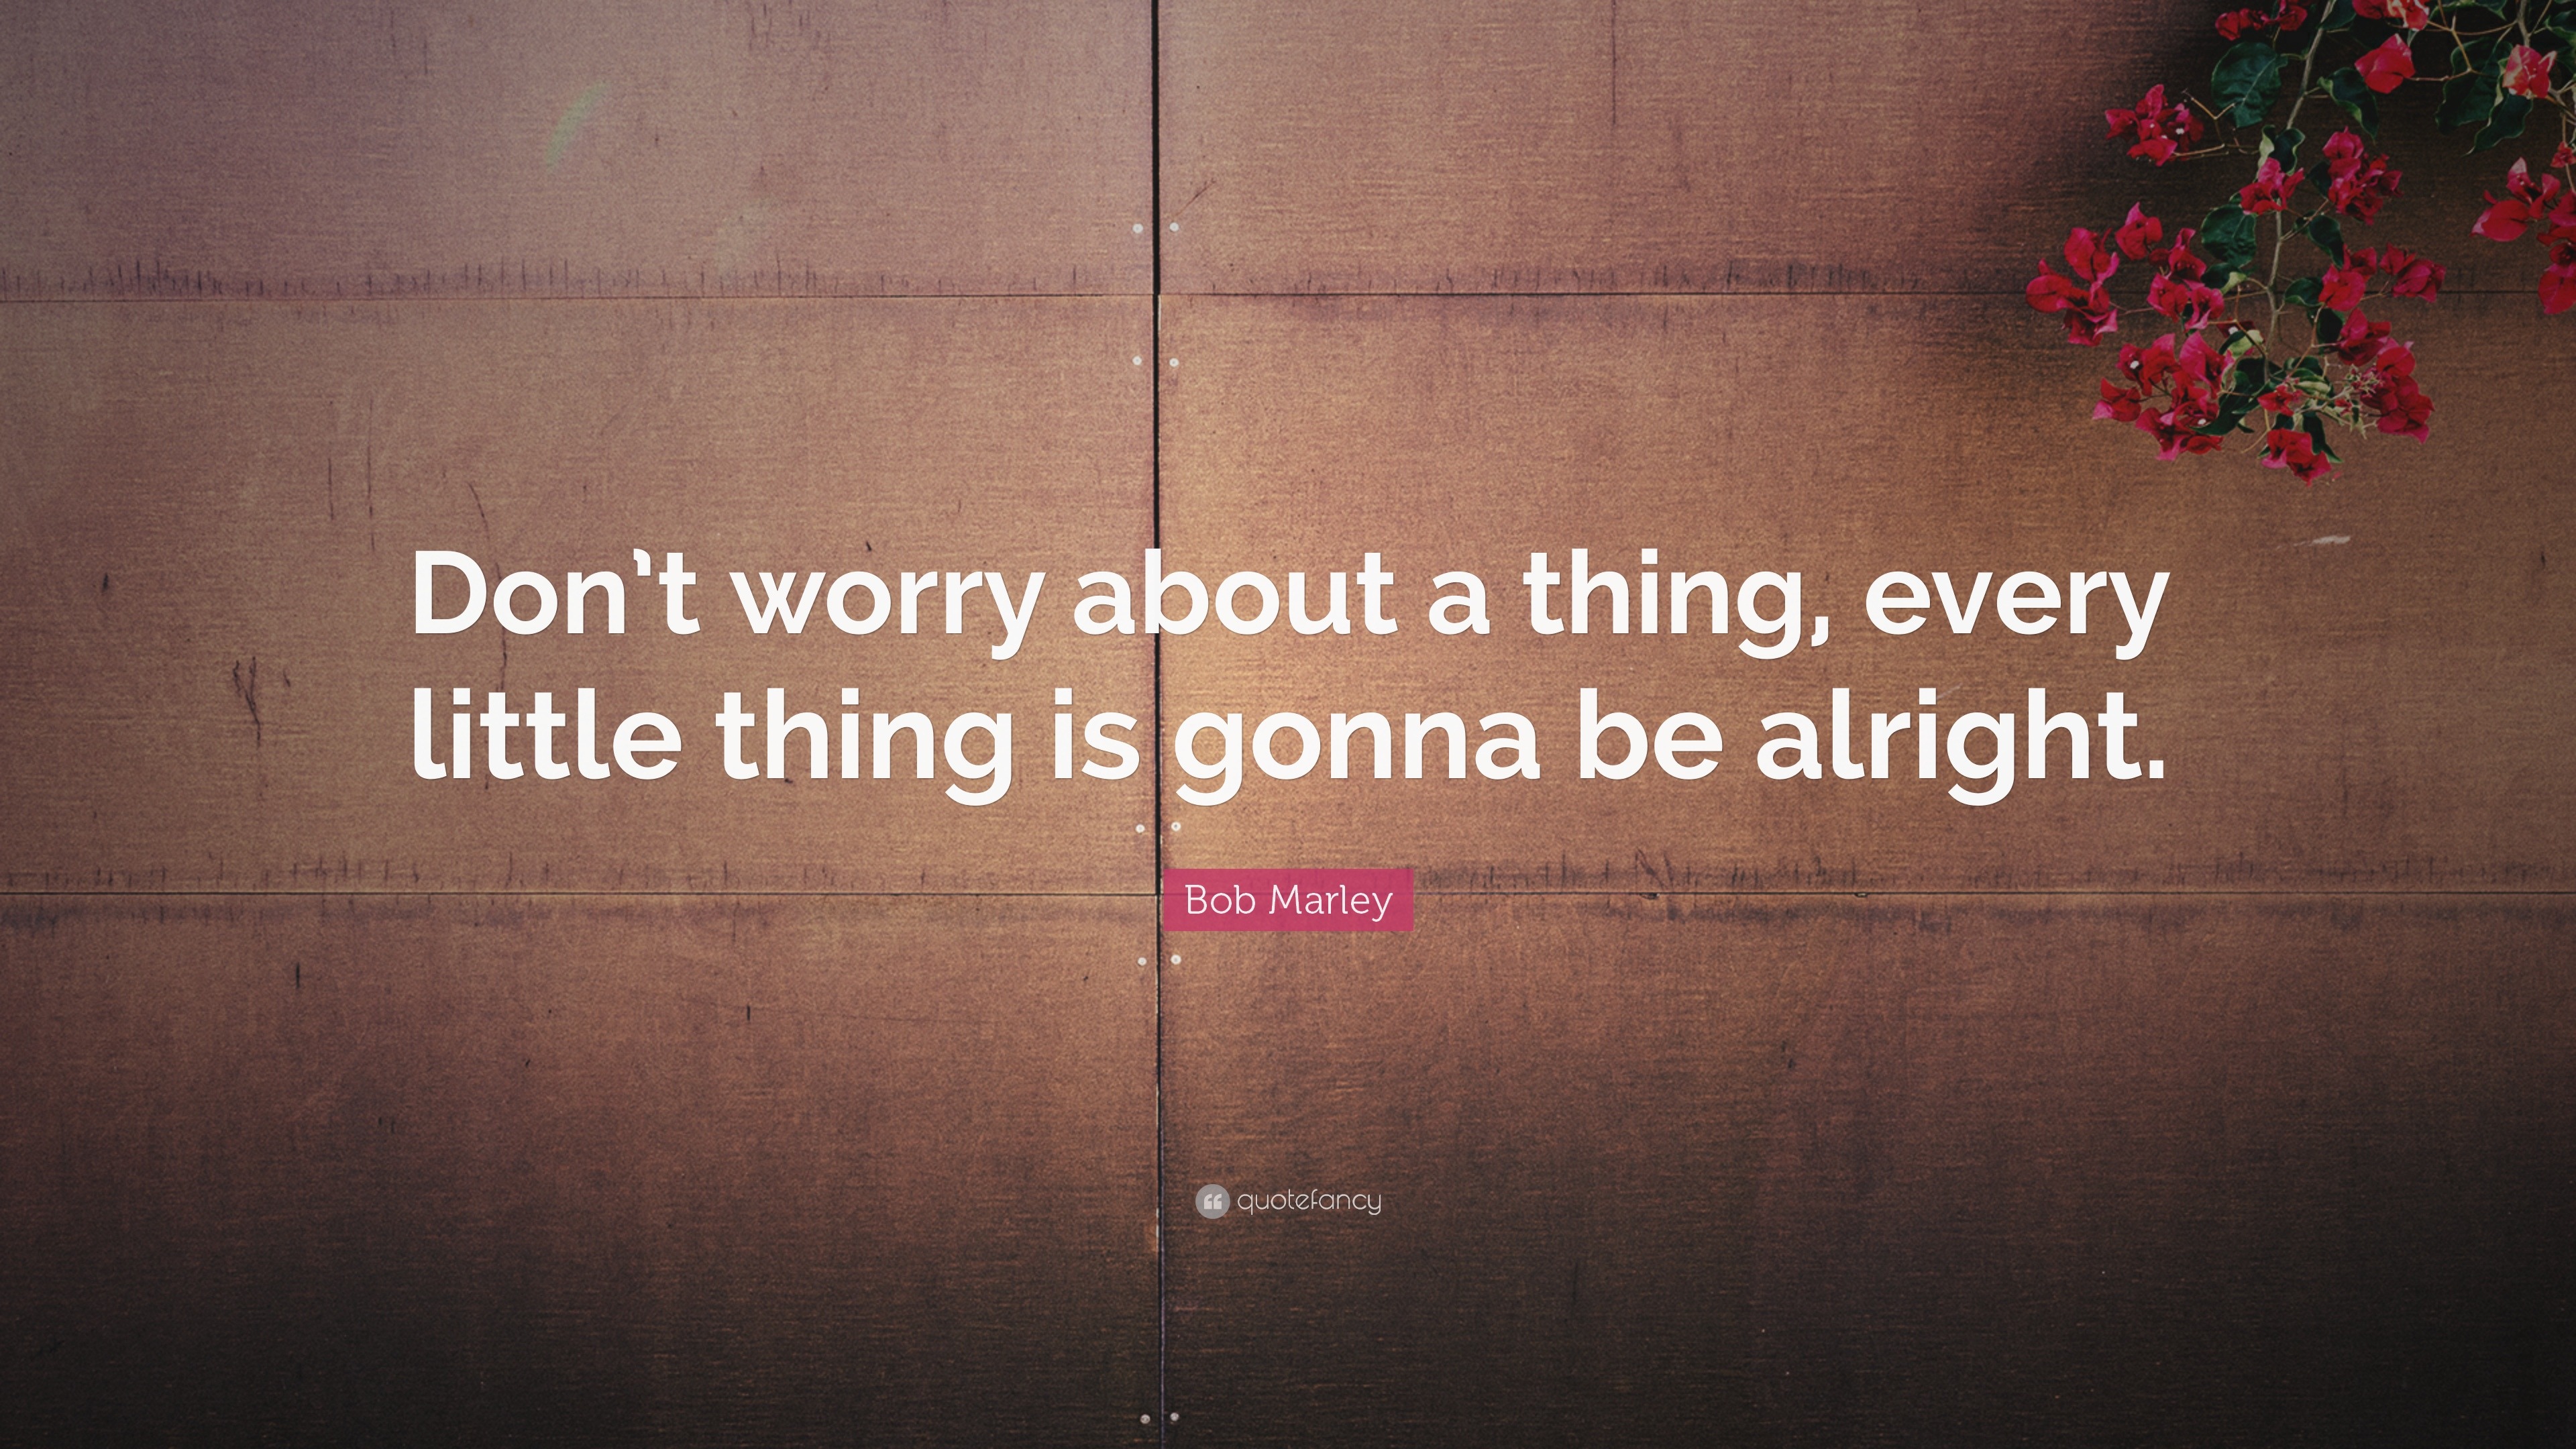 Bob Marley Quote: "Don't worry about a thing, every little ...